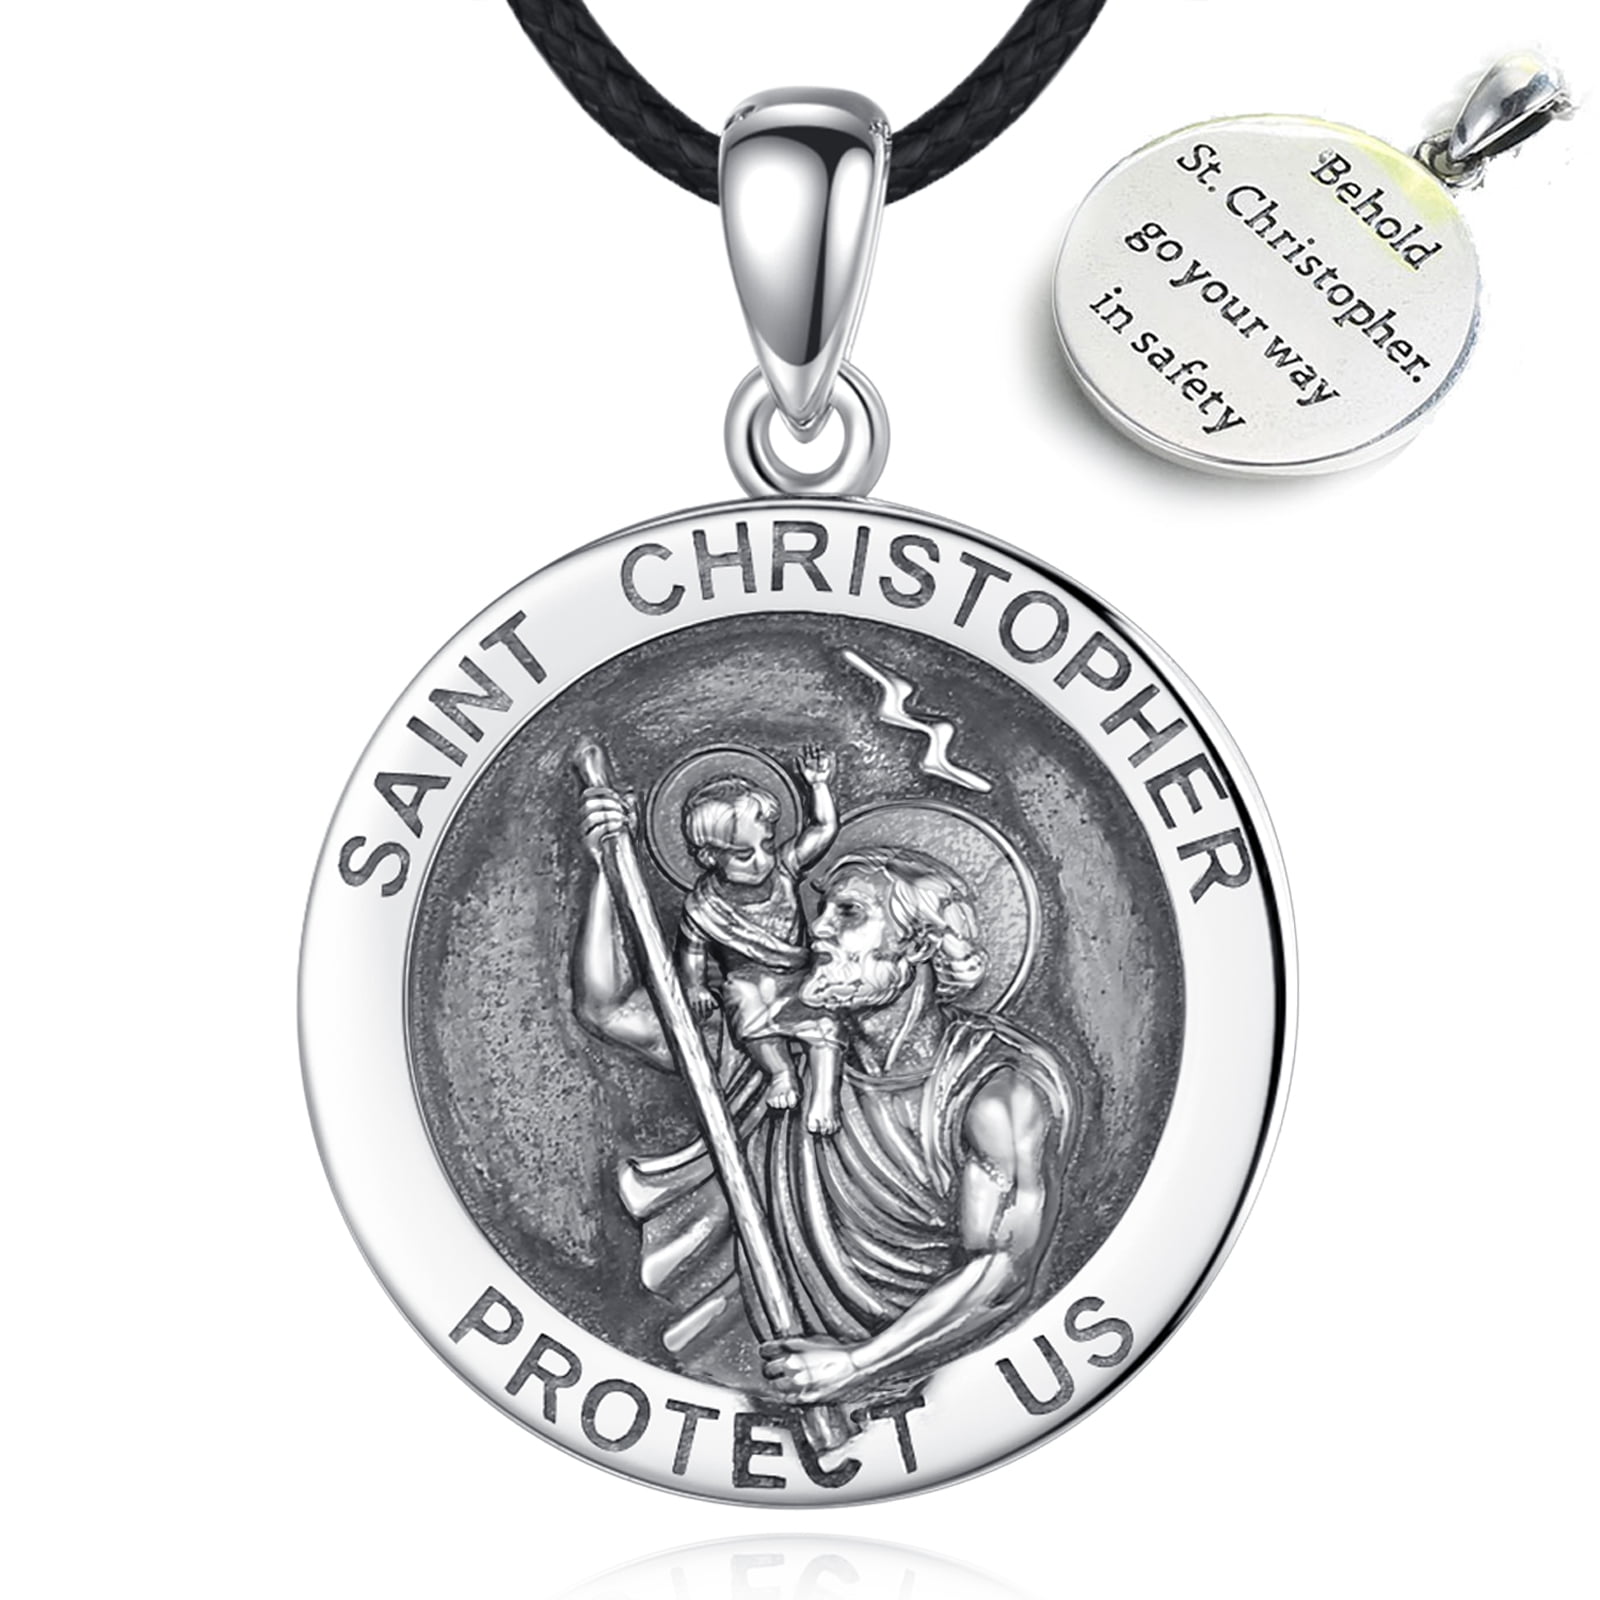 JUSTKIDSTOY St Christopher Necklace for Men Women 925 Sterling Silver Saint  Christophers Locket Necklace that Holds Pictures Photo Pendant Protection  Religious Medals Necklace Catholic Jewelry Gift | Amazon.com